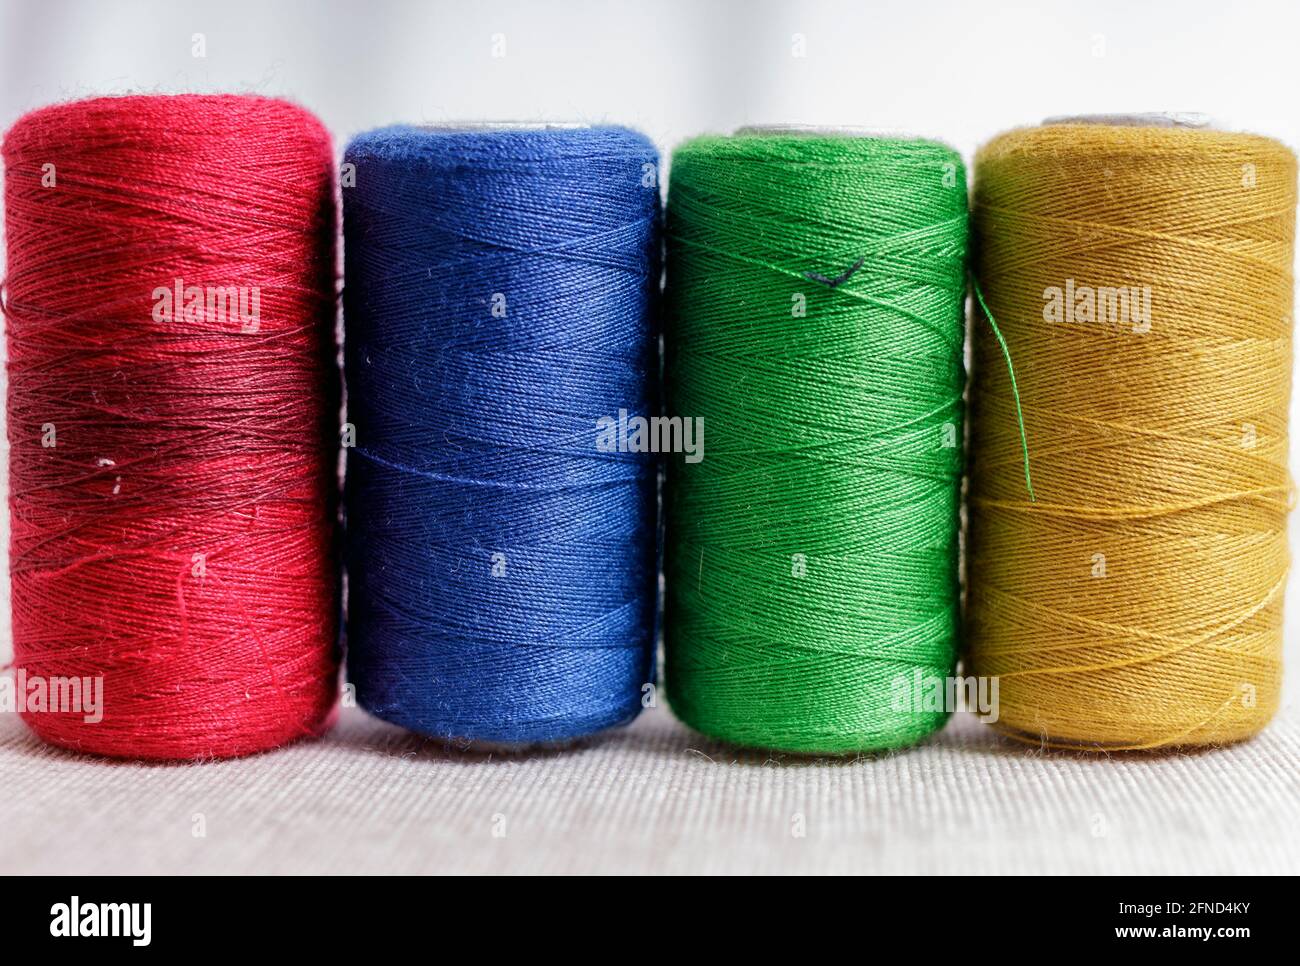 Spools of sewing thread Stock Photo - Alamy